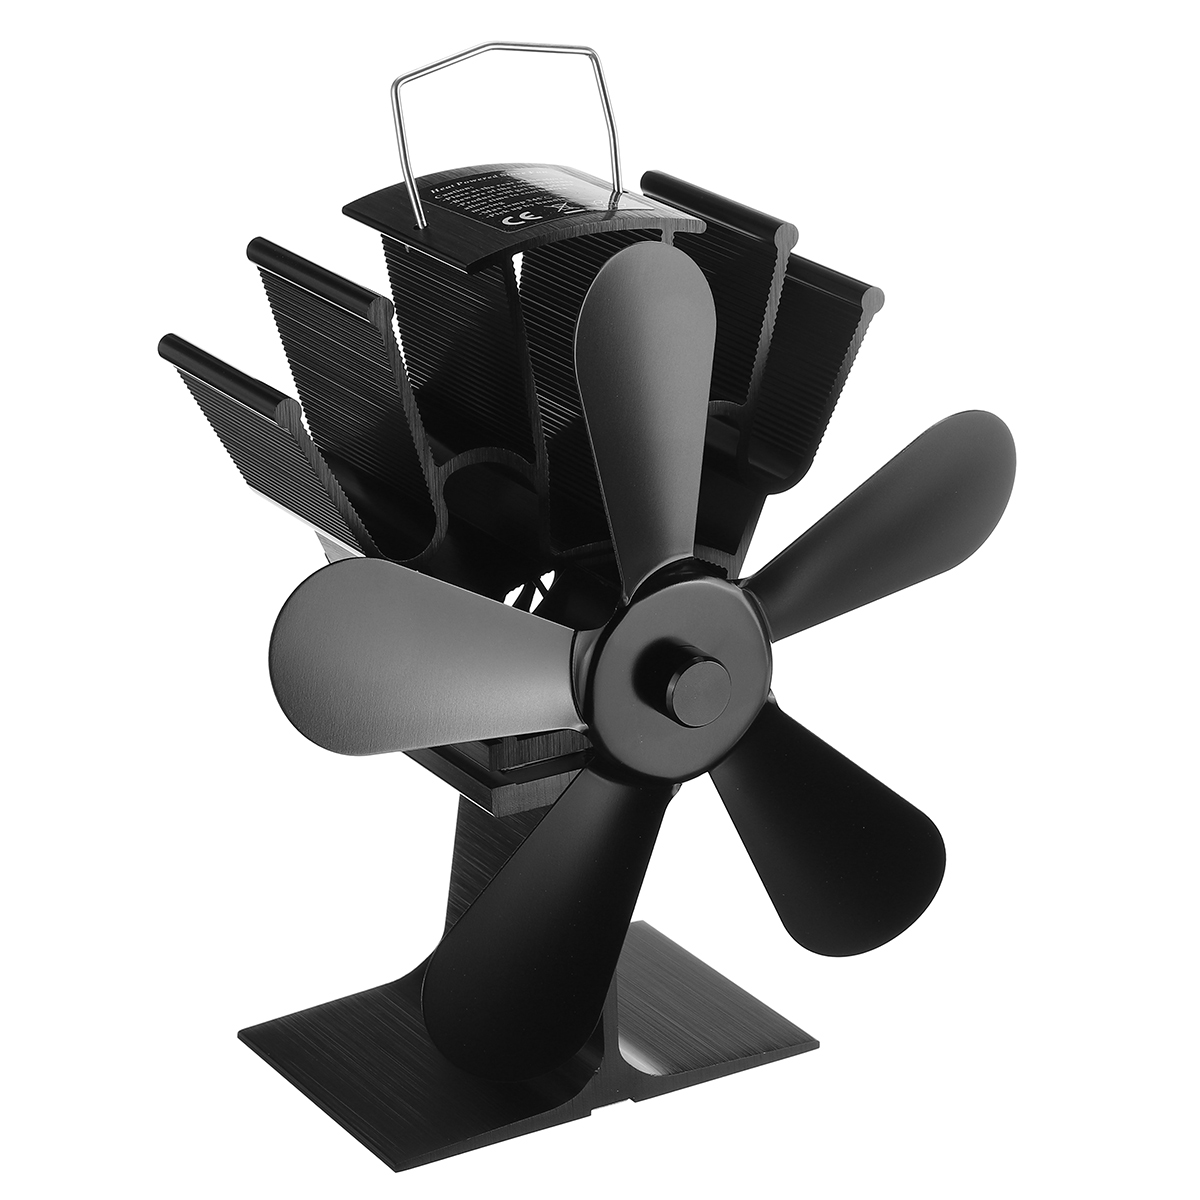 4-and-5-Blade-Heat-Self-Power-Wood-Stove-Fan-Burner-Efficient-Fireplace-Silent-1735450-11